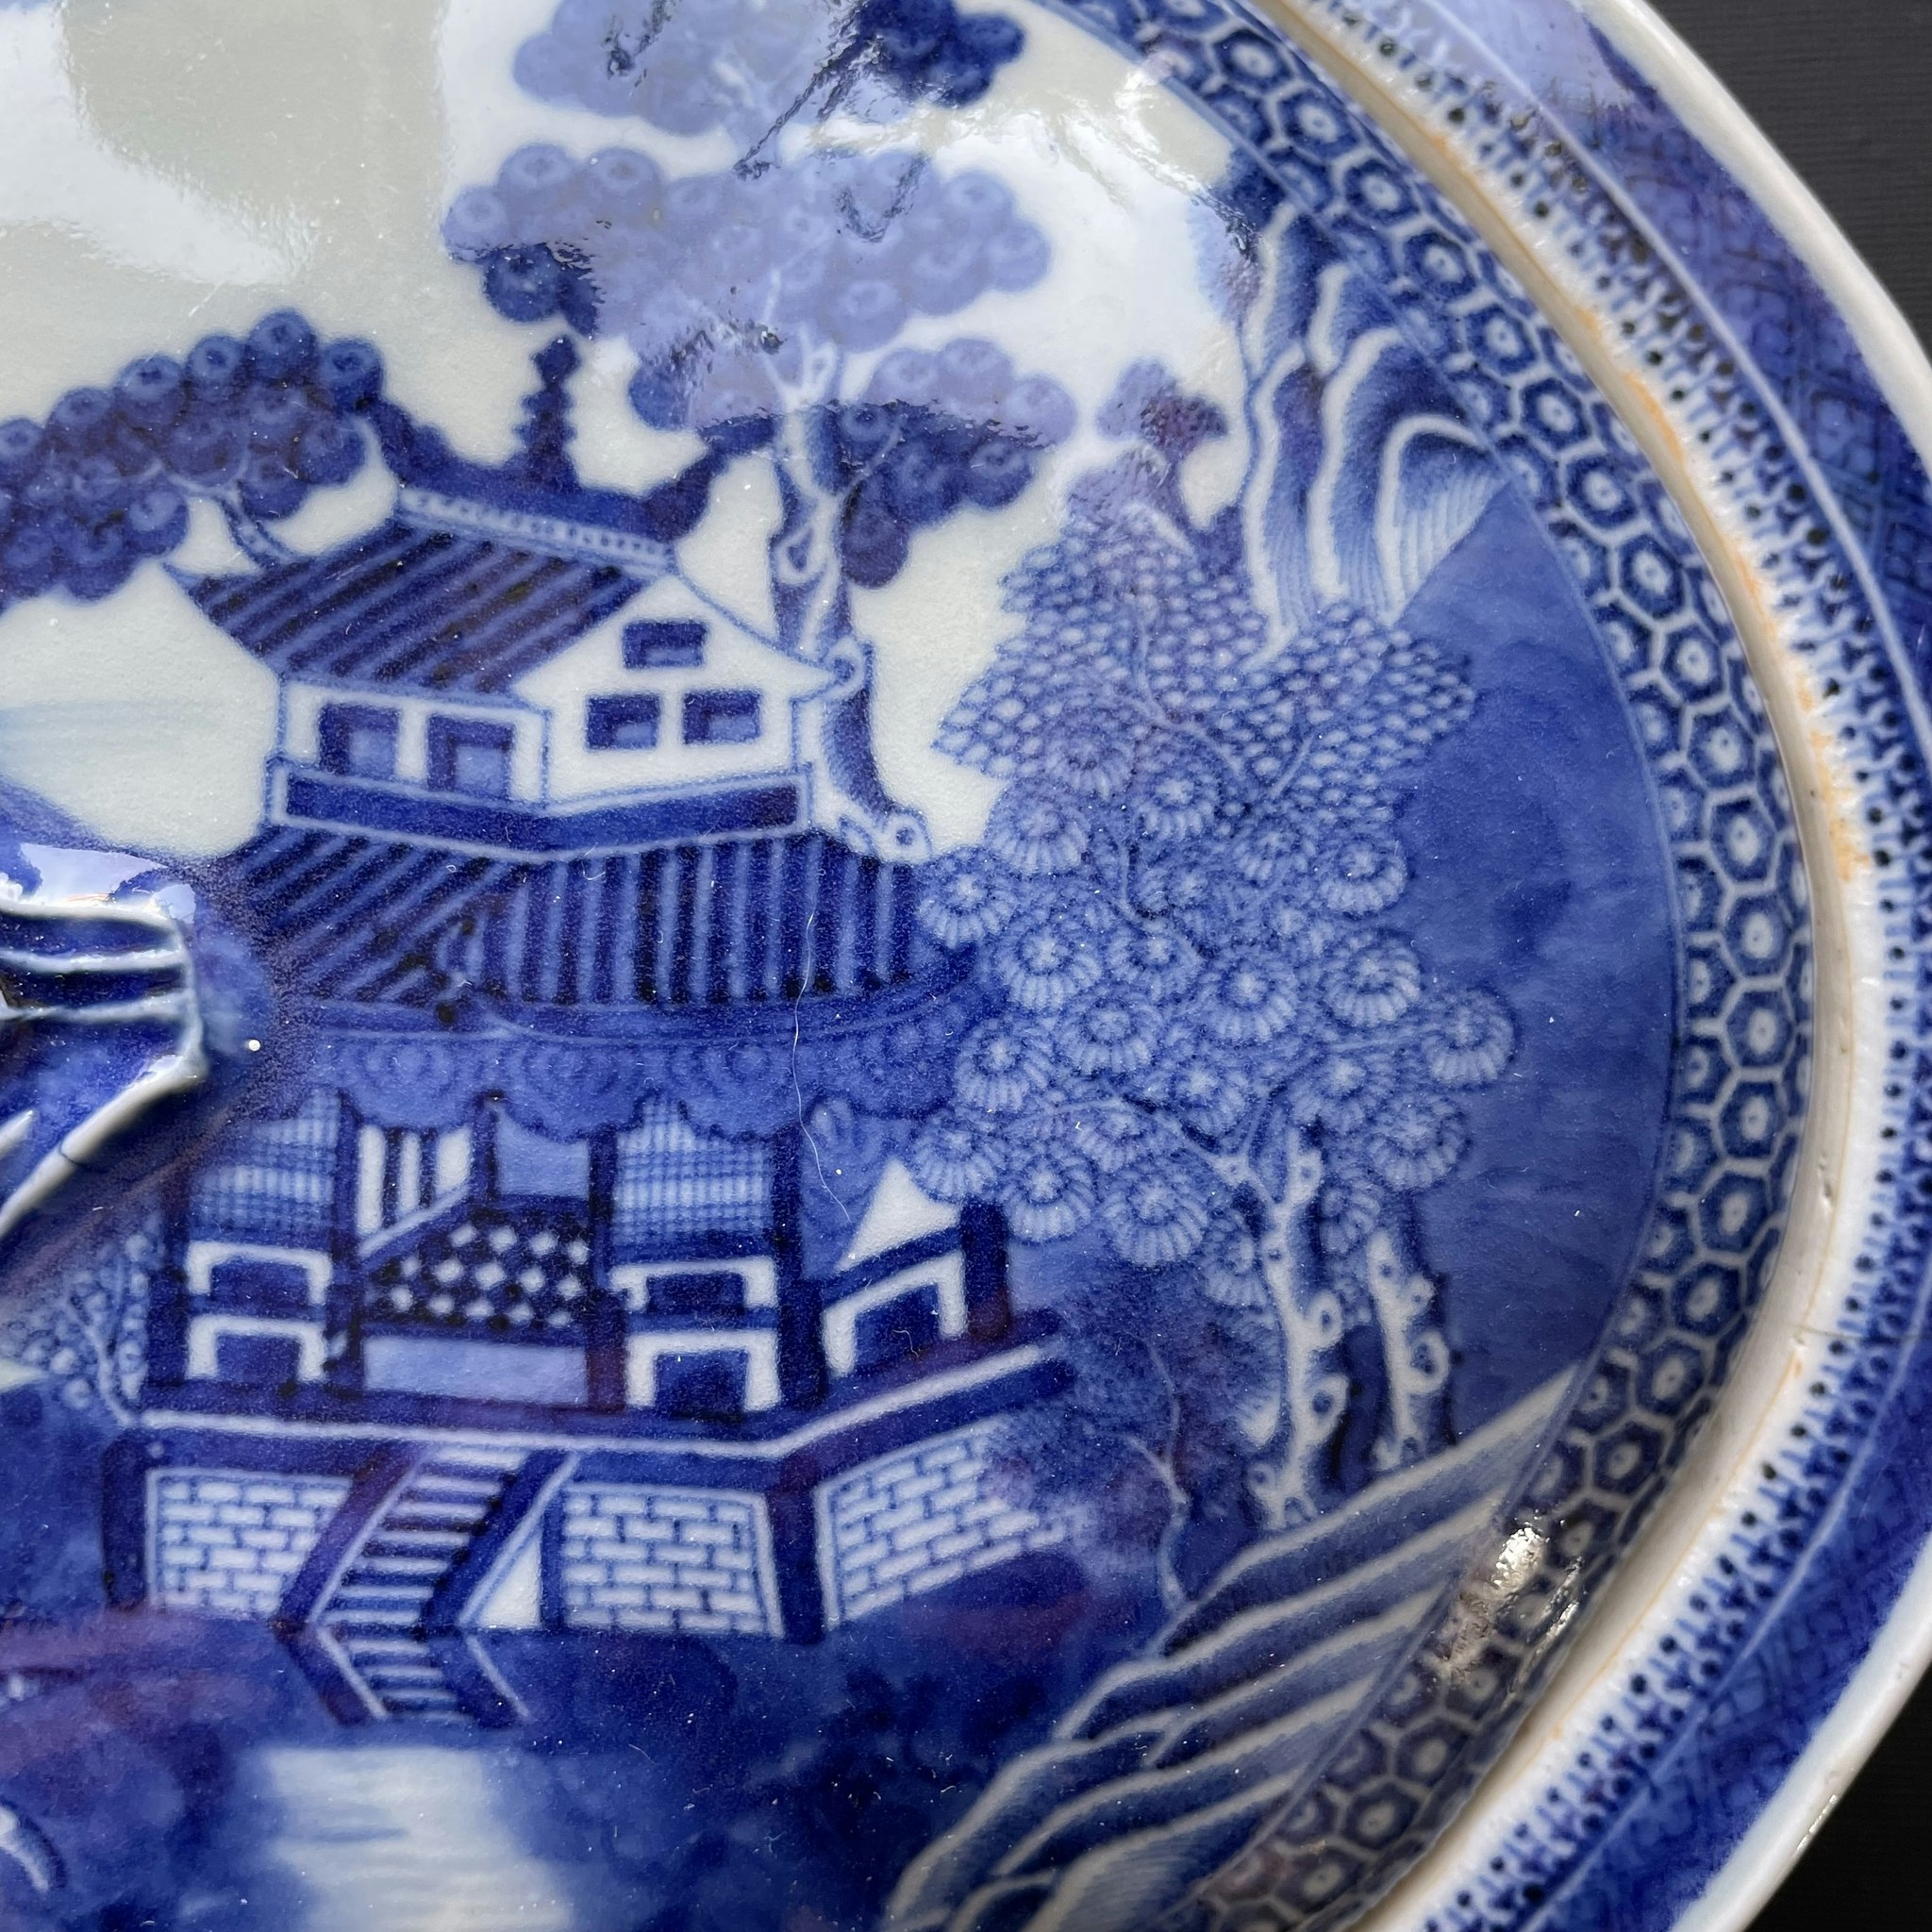 A Chinese export tureen in underglazed blue & white Qianlong period, Qing #1022